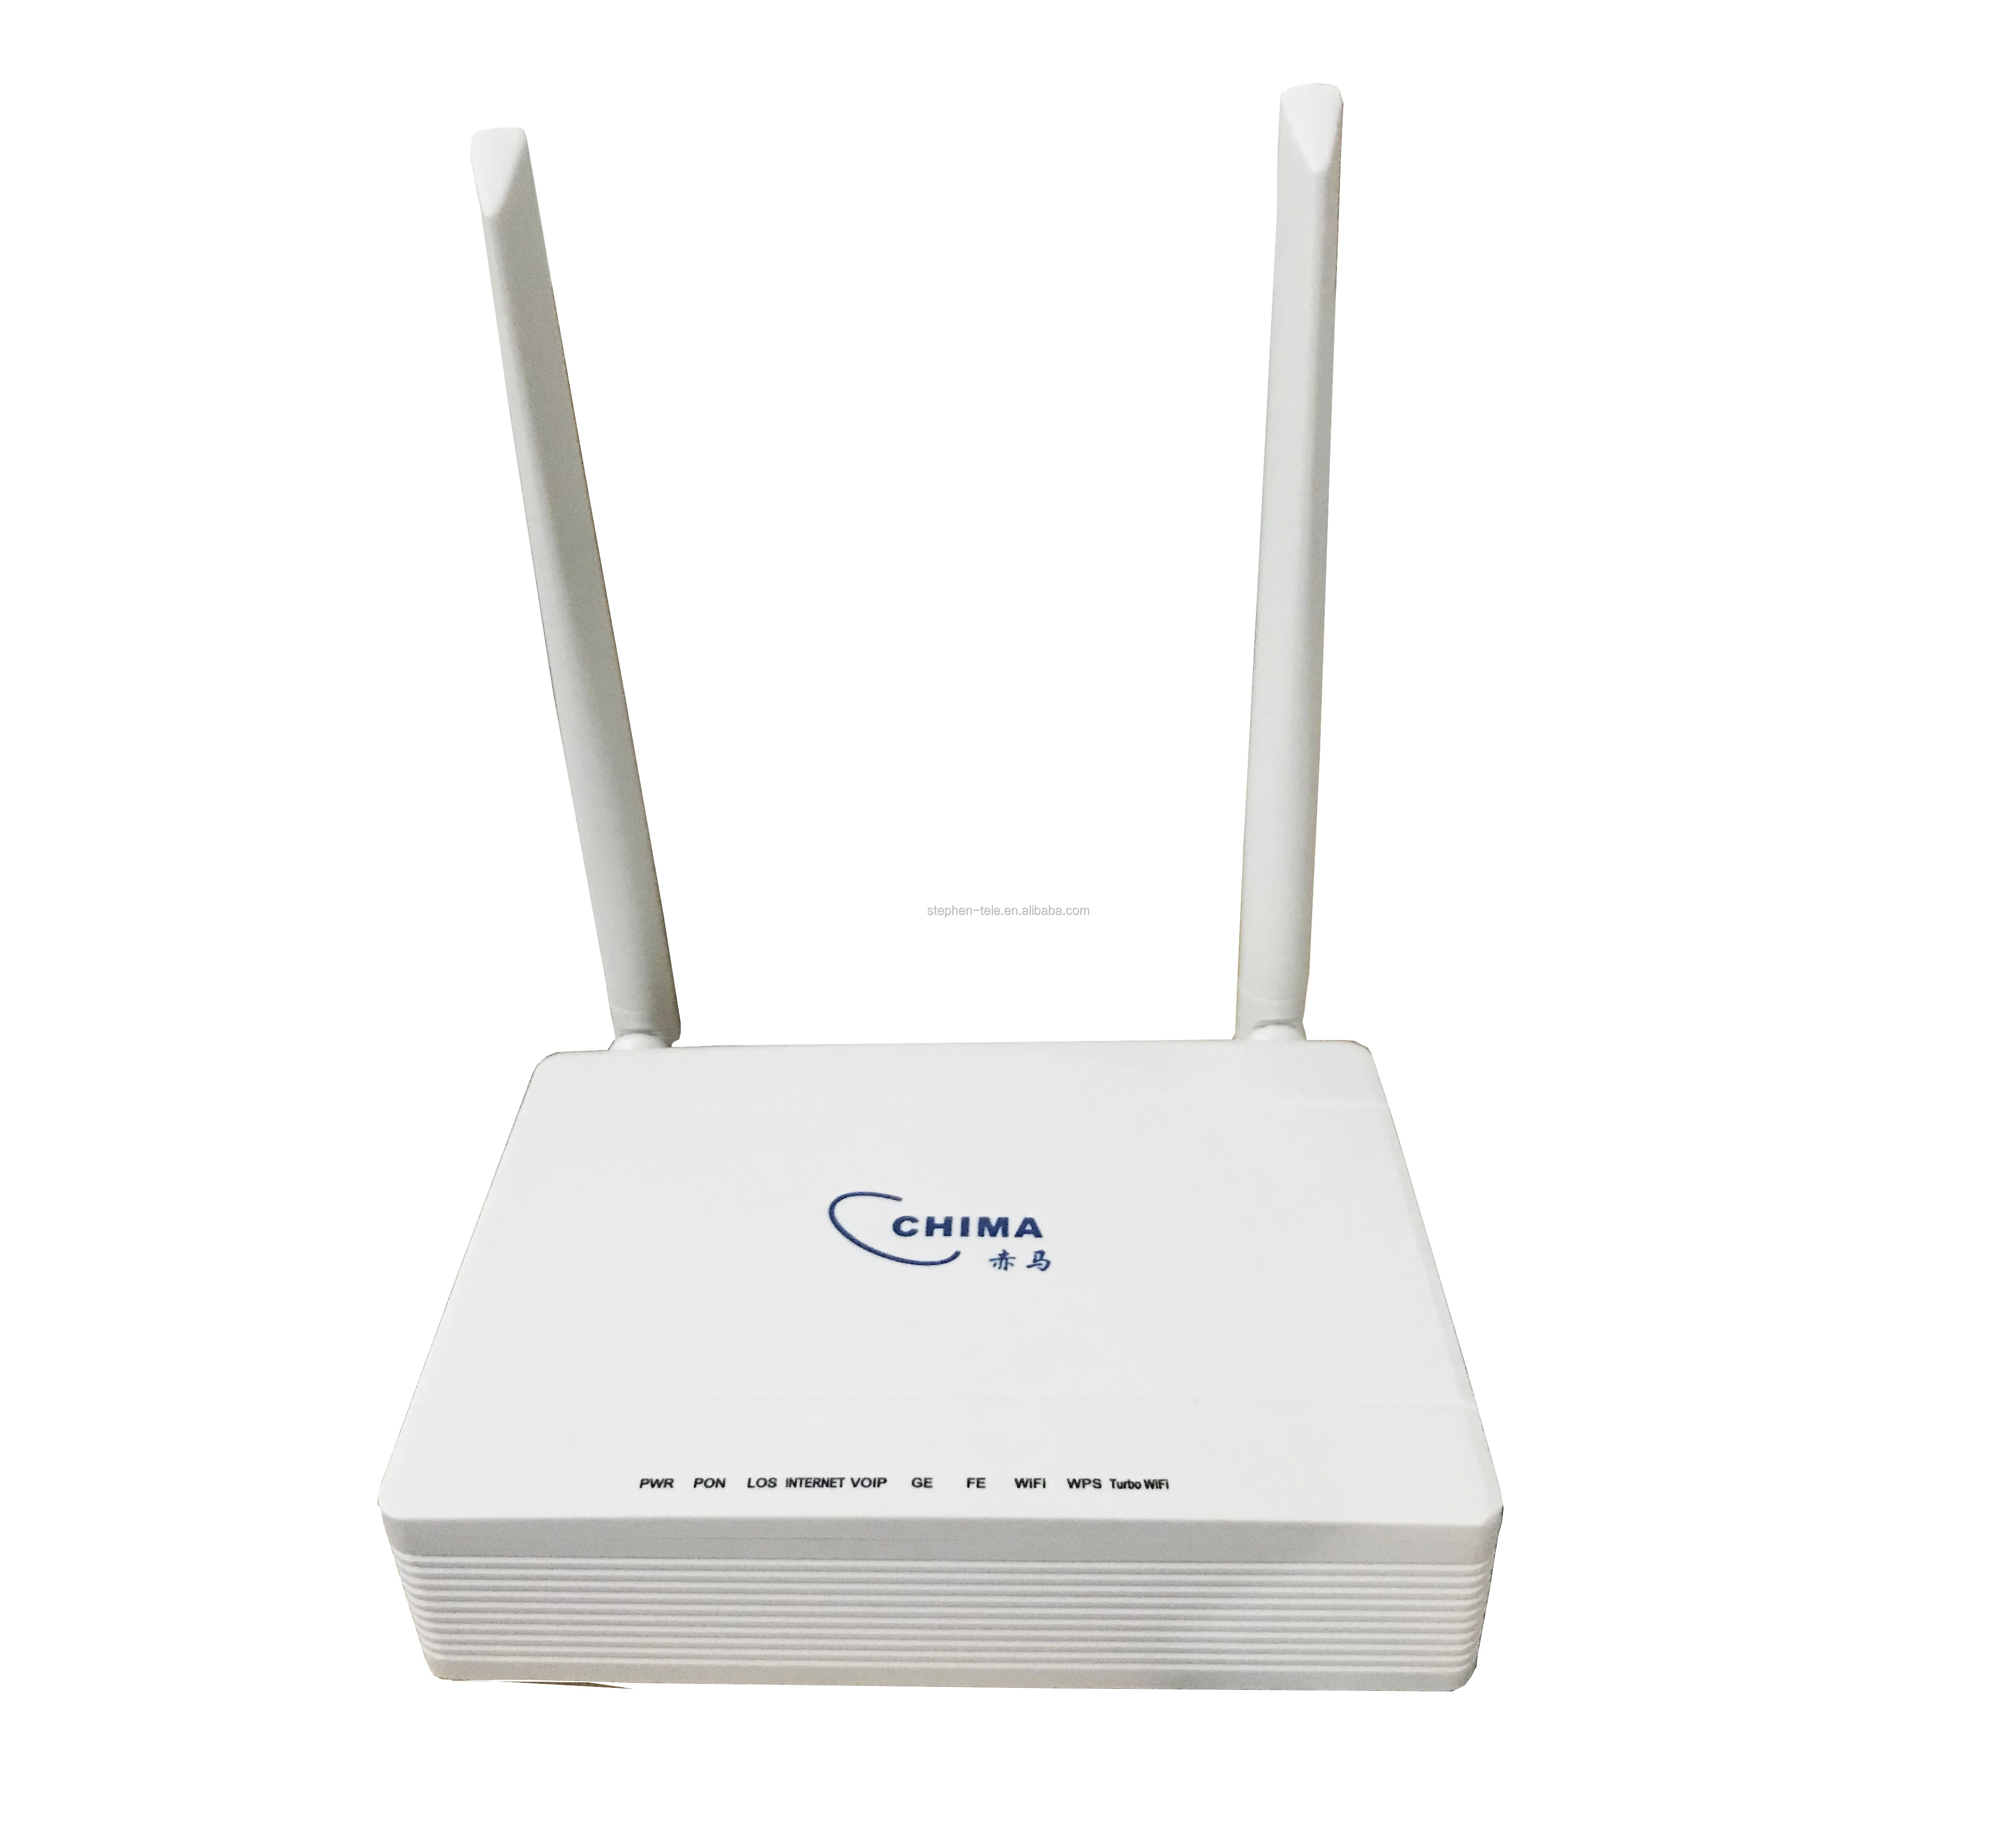 wireless networking equipment 4GE+CATV+WiFi GPON ONU ONT Support high quality TV image transmissions over 1550nm Fiber